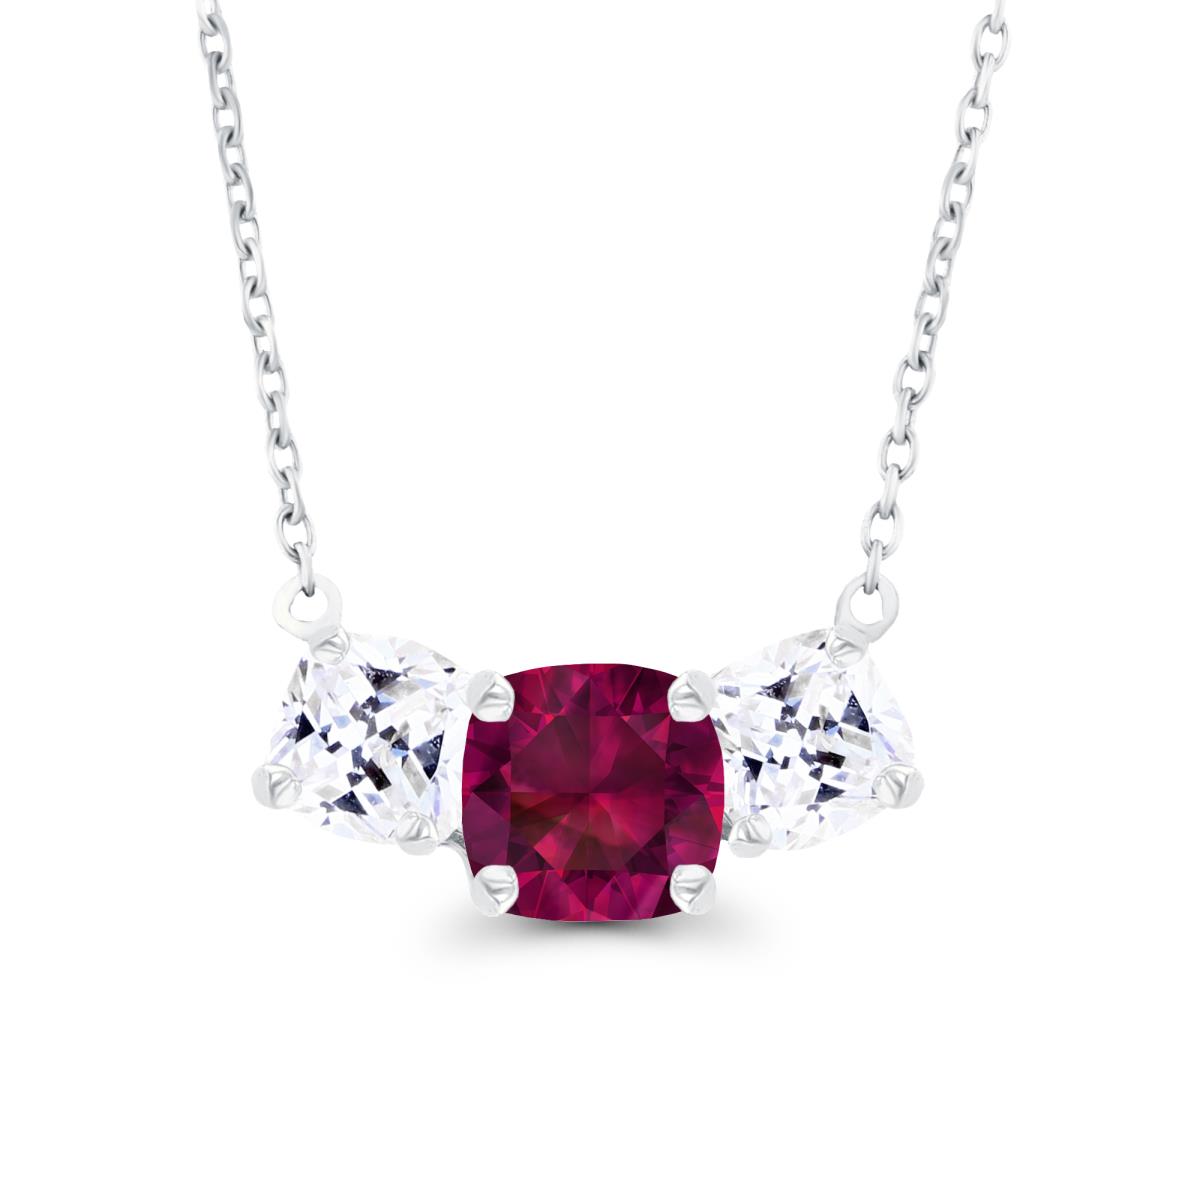 14K White Gold 5mm Cushion Created Ruby & 4mm Cushion Created White Sapphire 3-Stone 18" Necklace